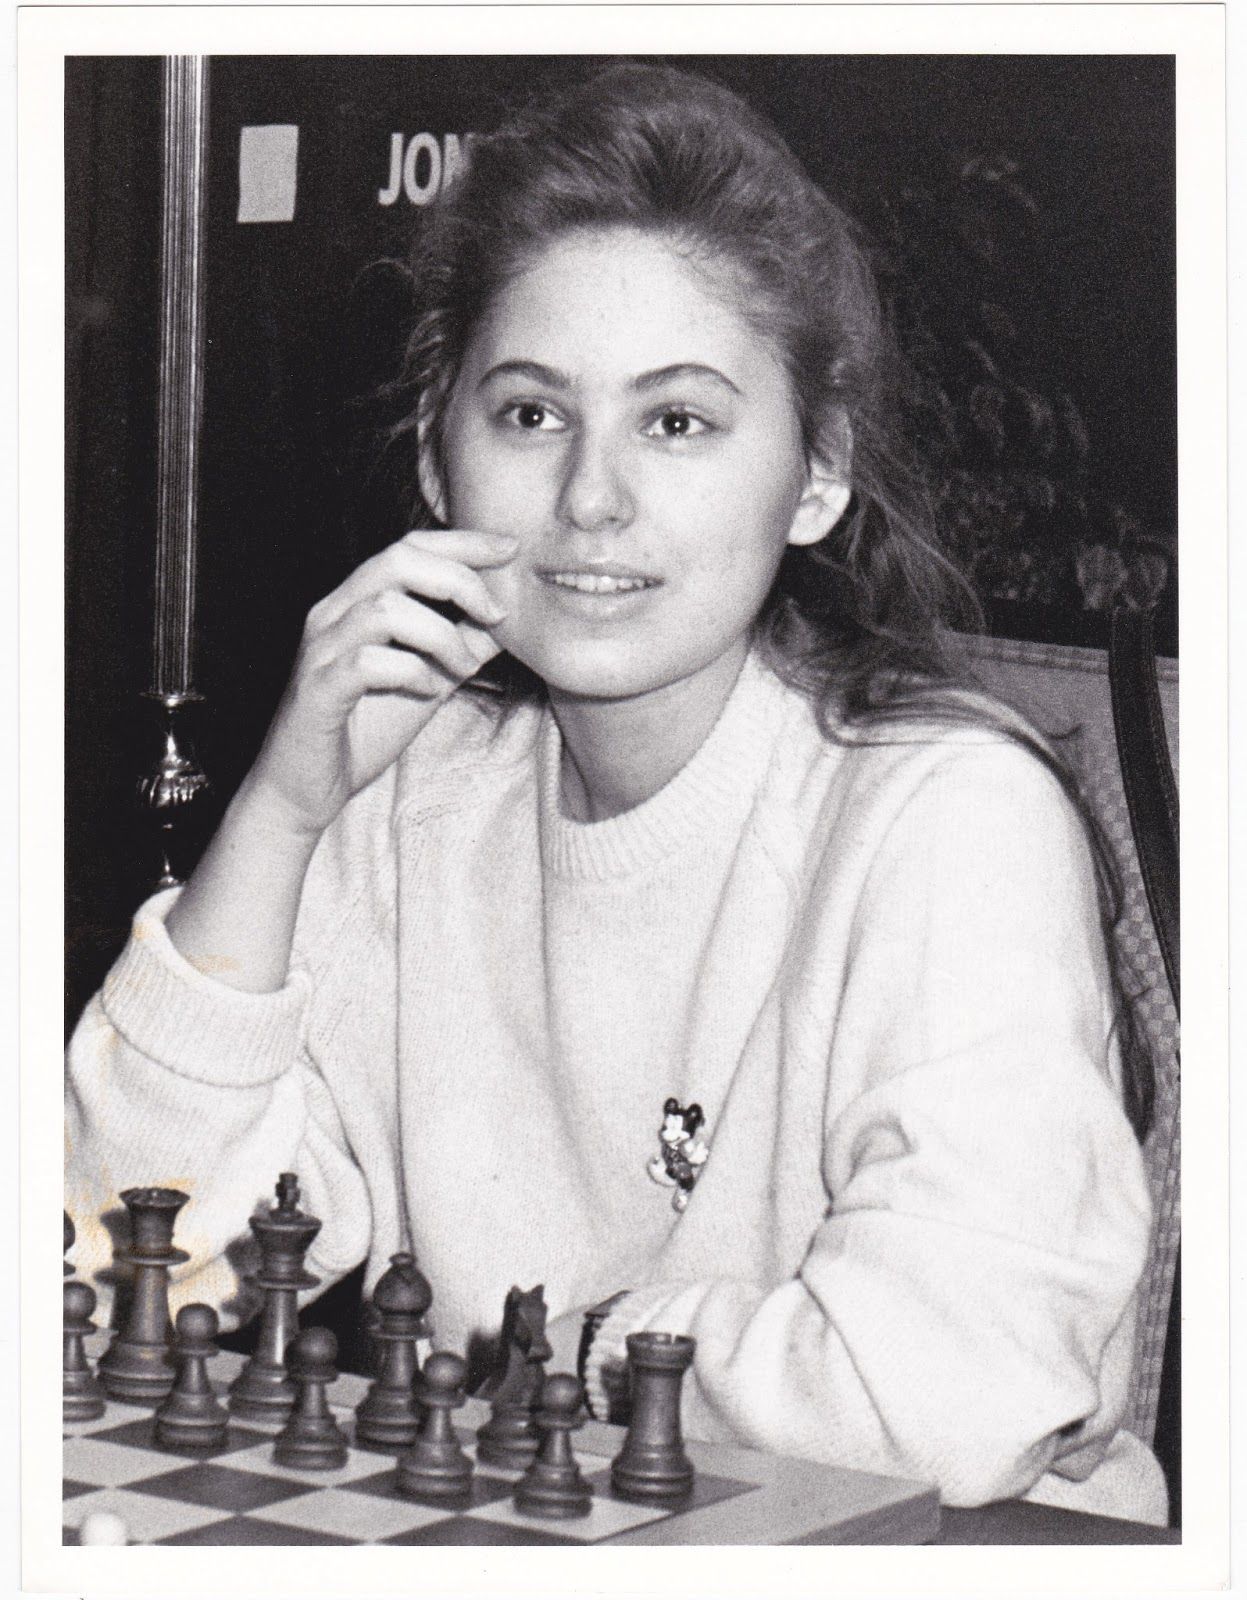 Five Women Chess Players That Have Set The Stage Alight